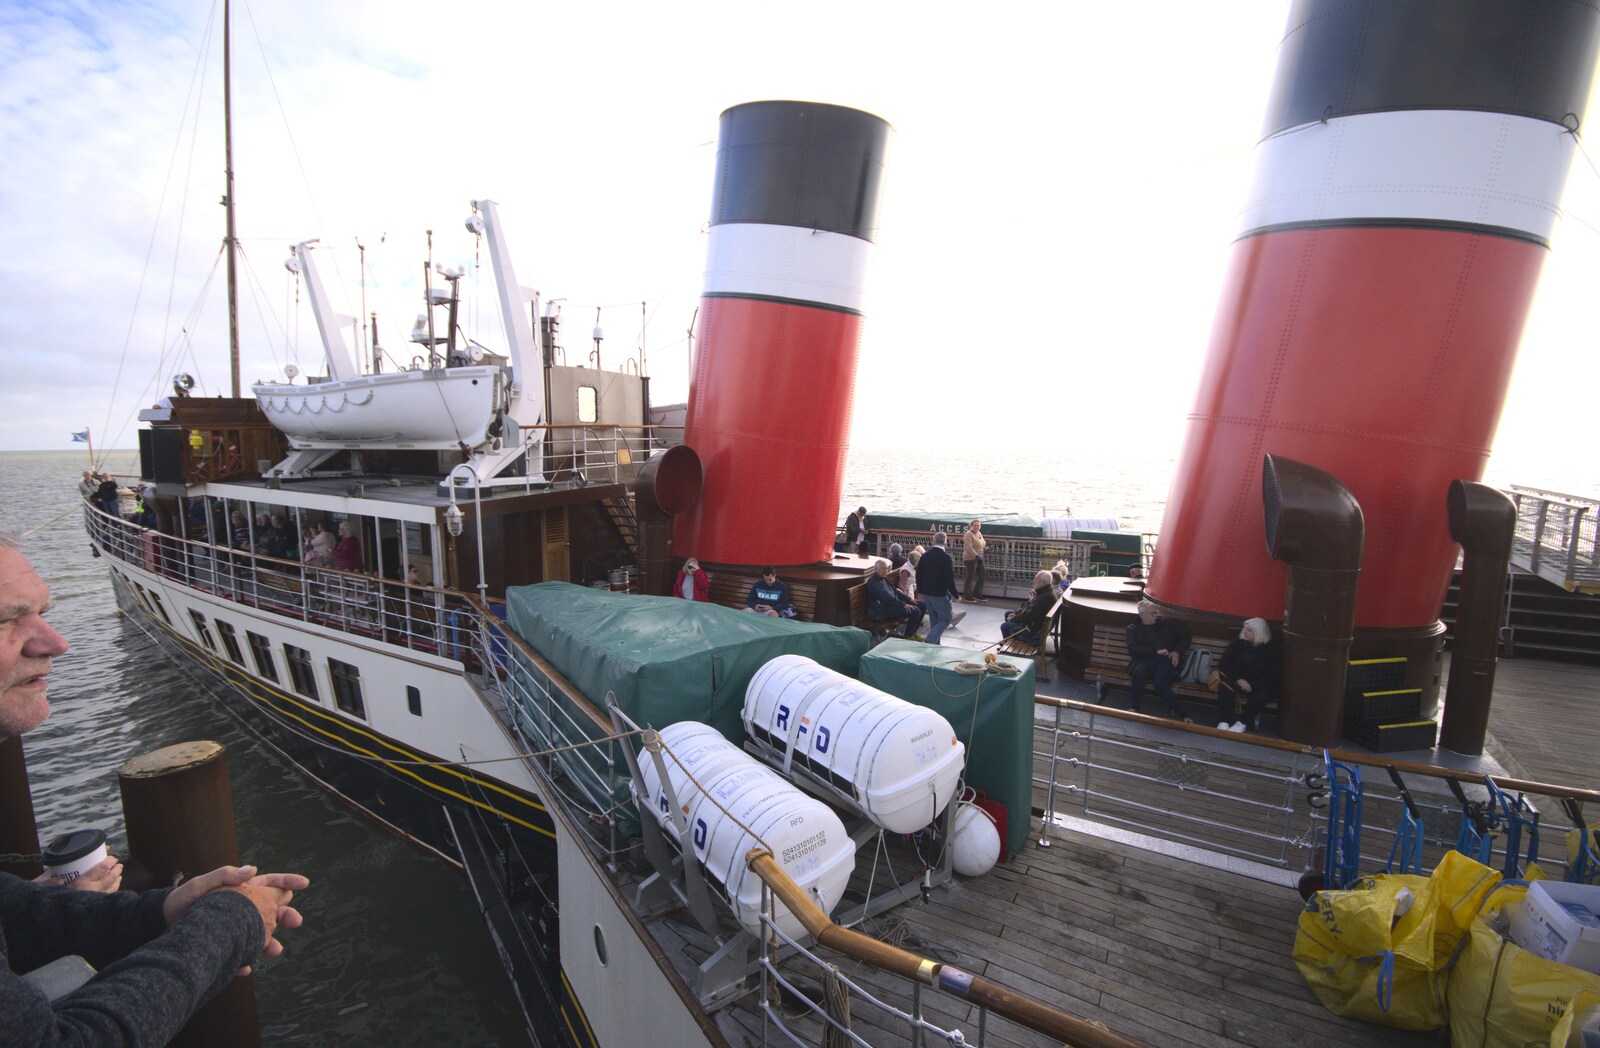 A view of the Waverley from The Waverley Paddle Steamer at Southwold Pier, Suffolk - 27th September 2023